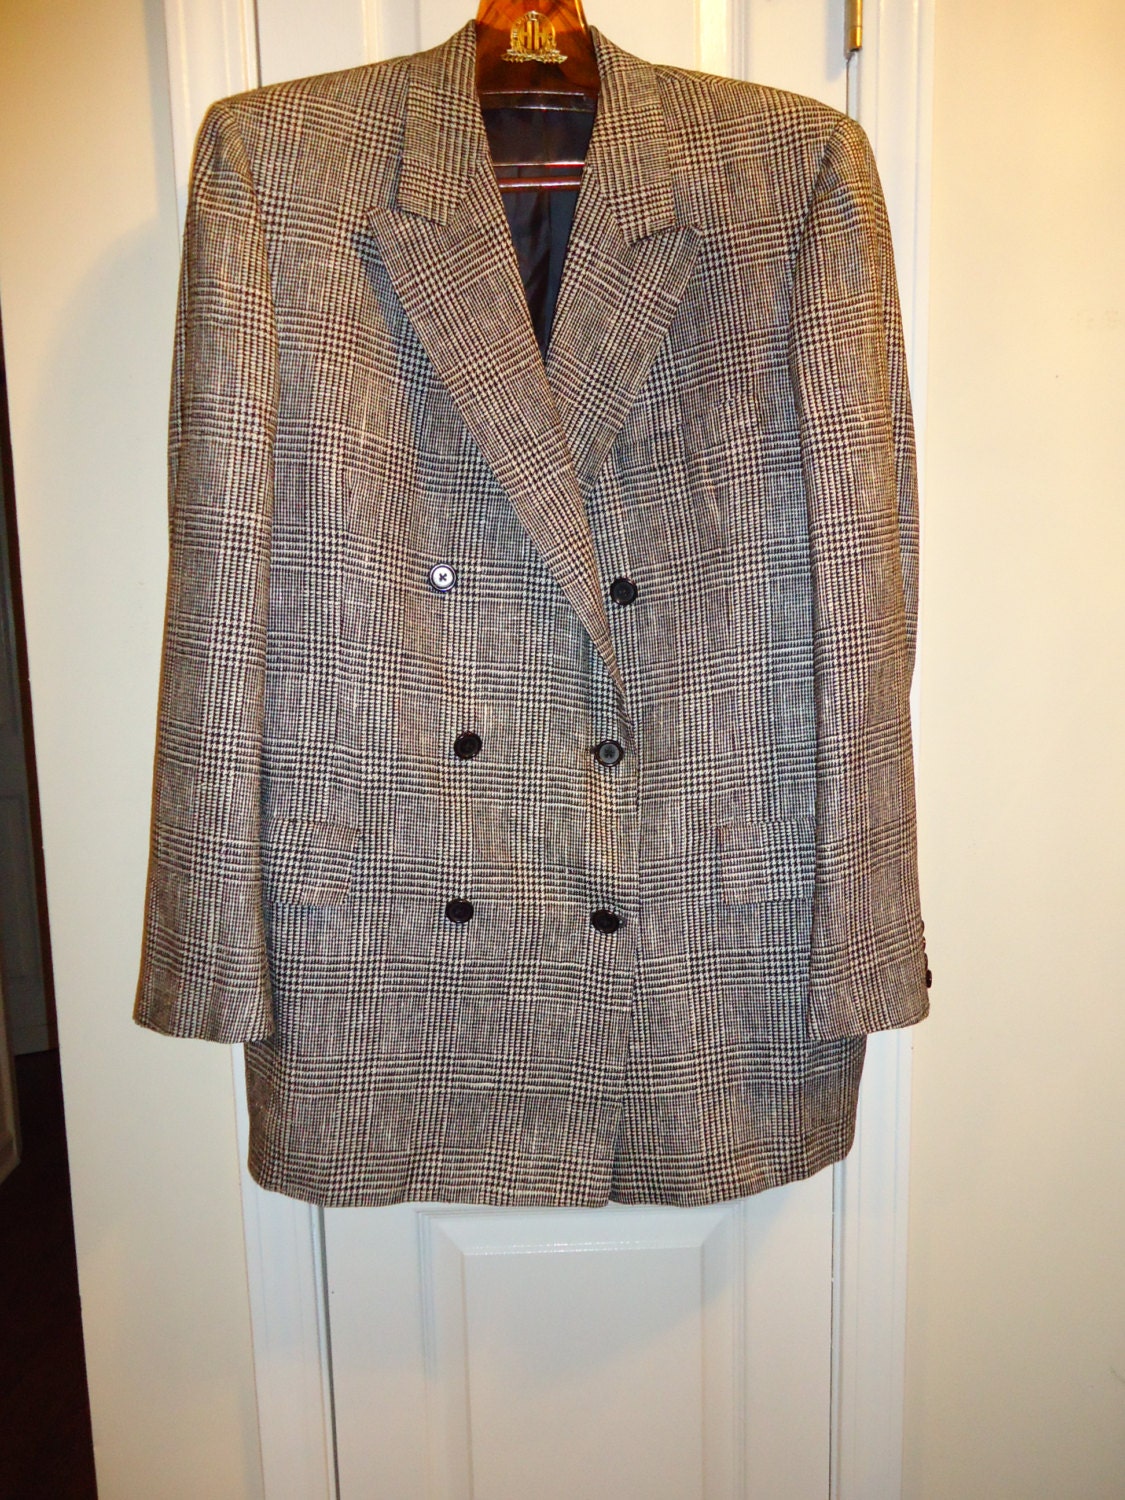 OXXFORD CLOTHES Double Breasted Balmoral Silk Sports Coat 44L